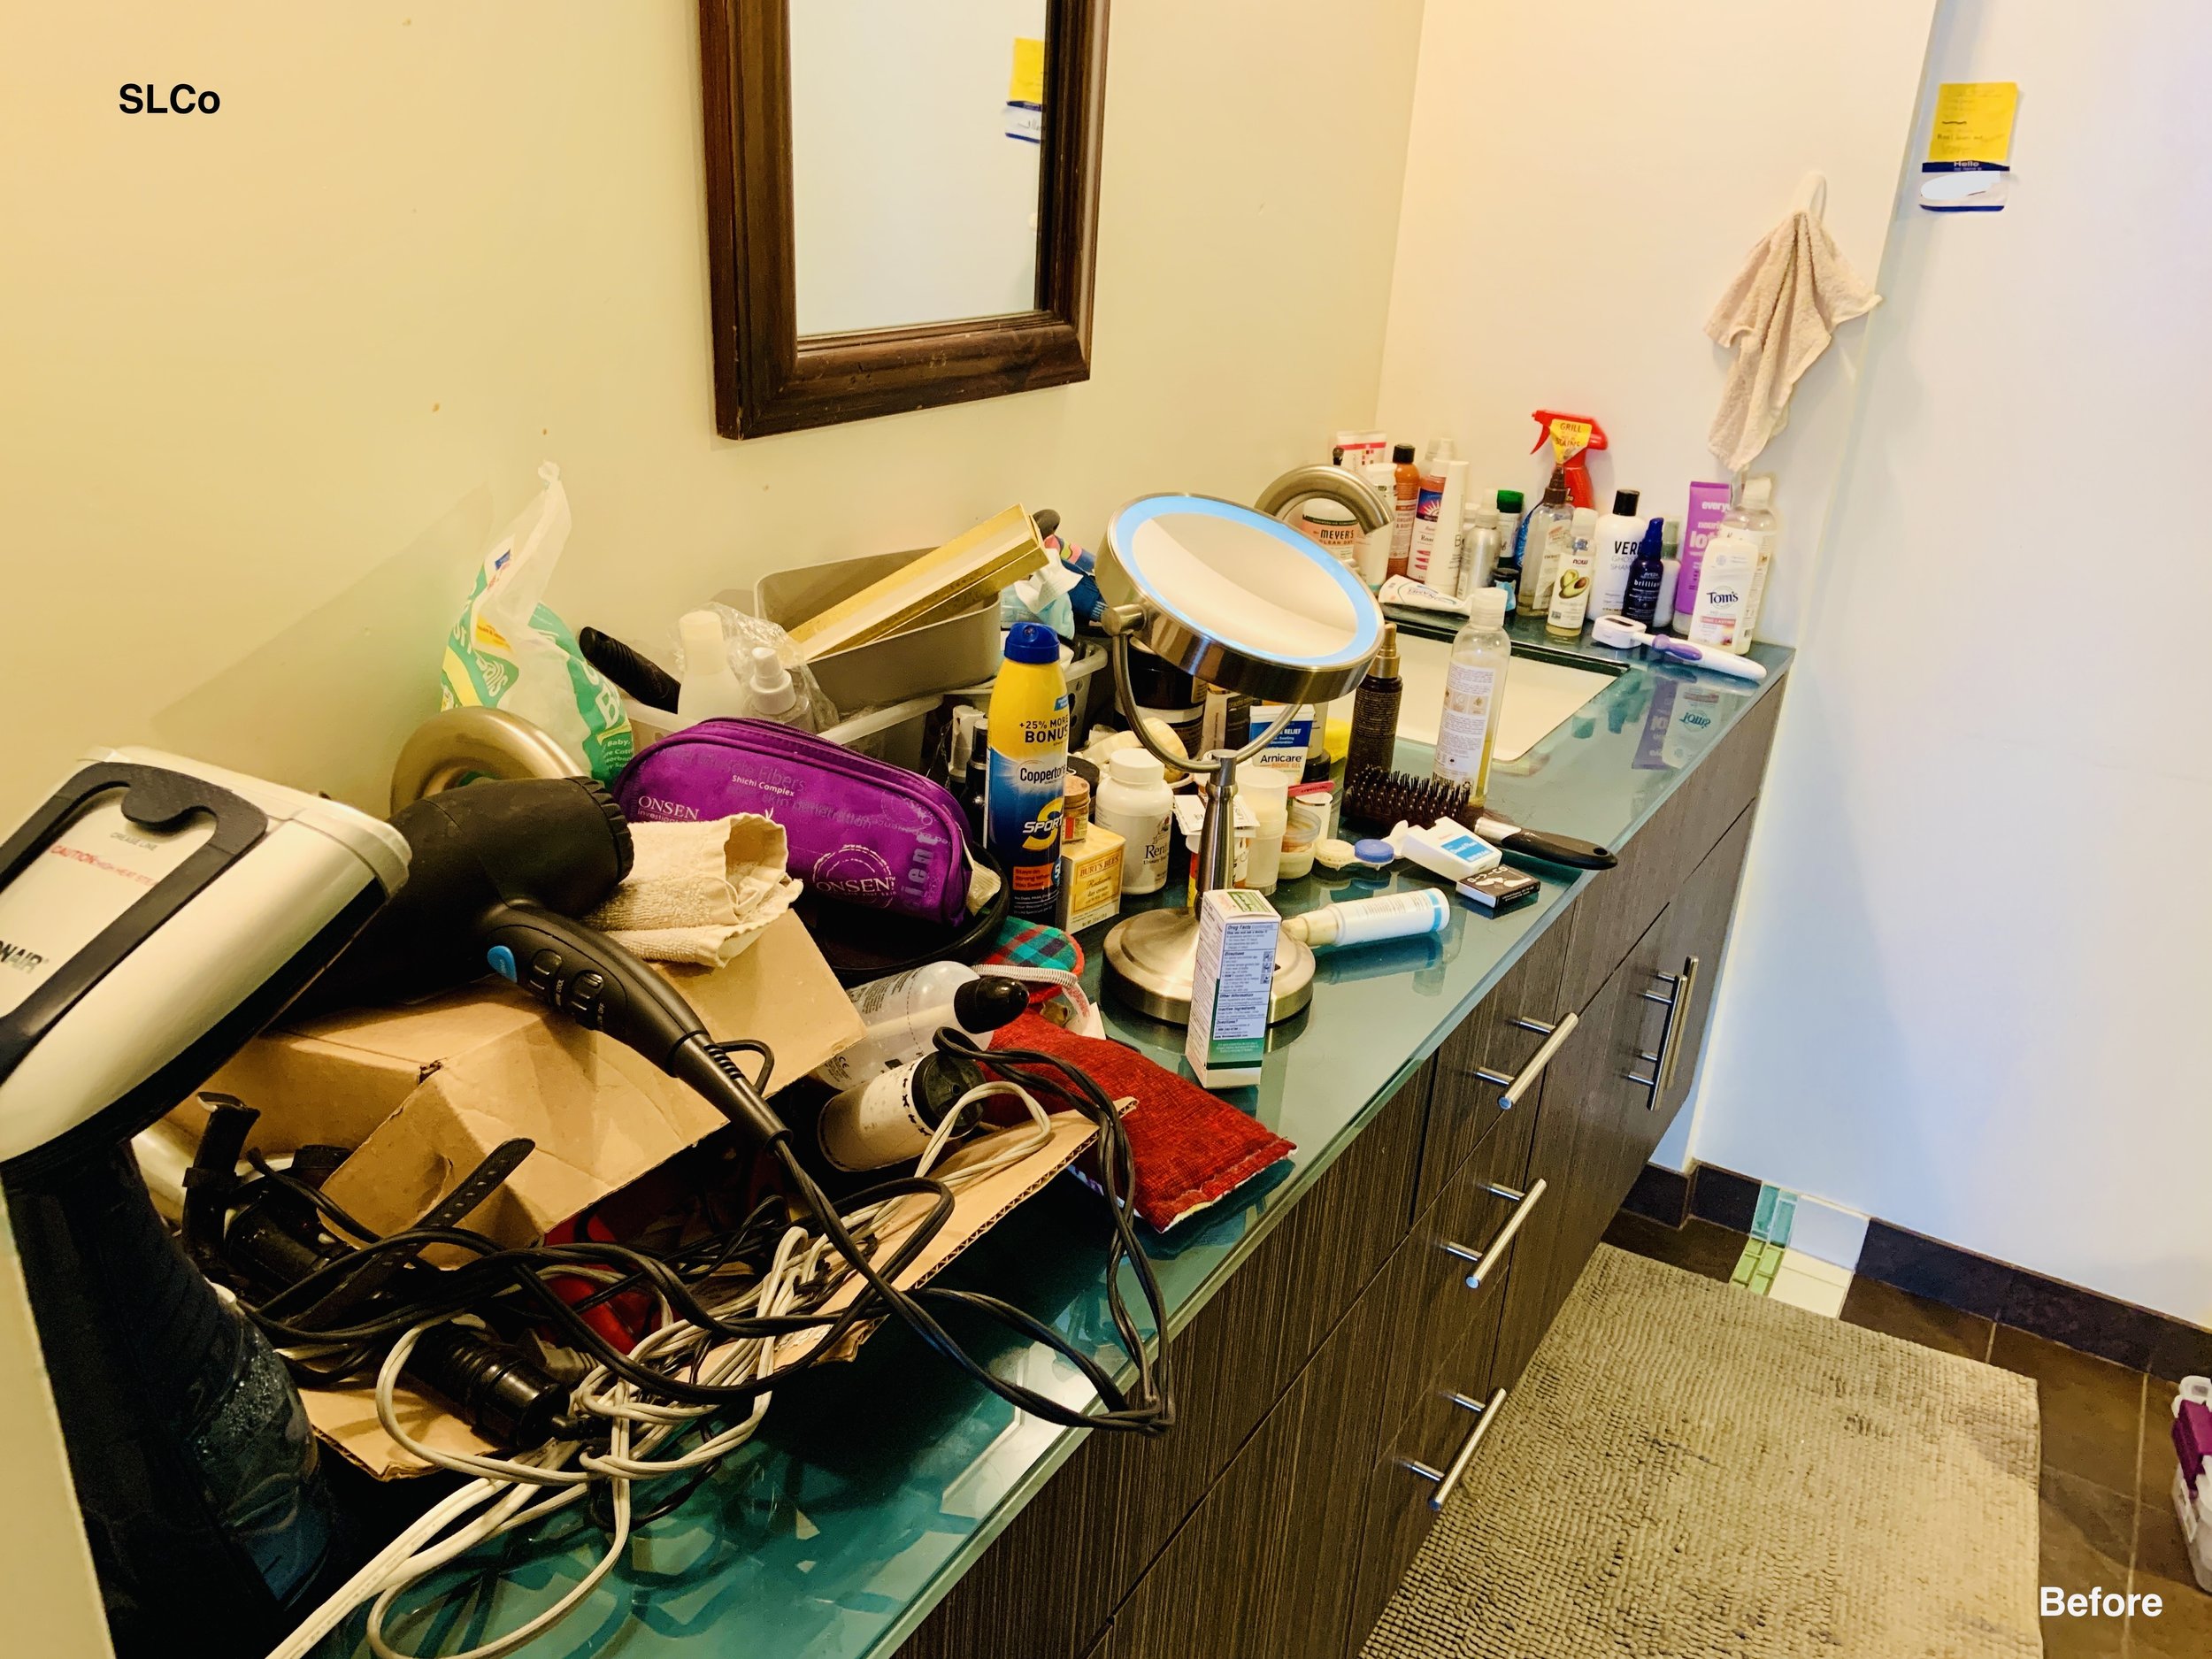 Before photo of a bathroom with boxes, appliances and items stacked on bathroom counter and in one of the two sinks, unusable space.